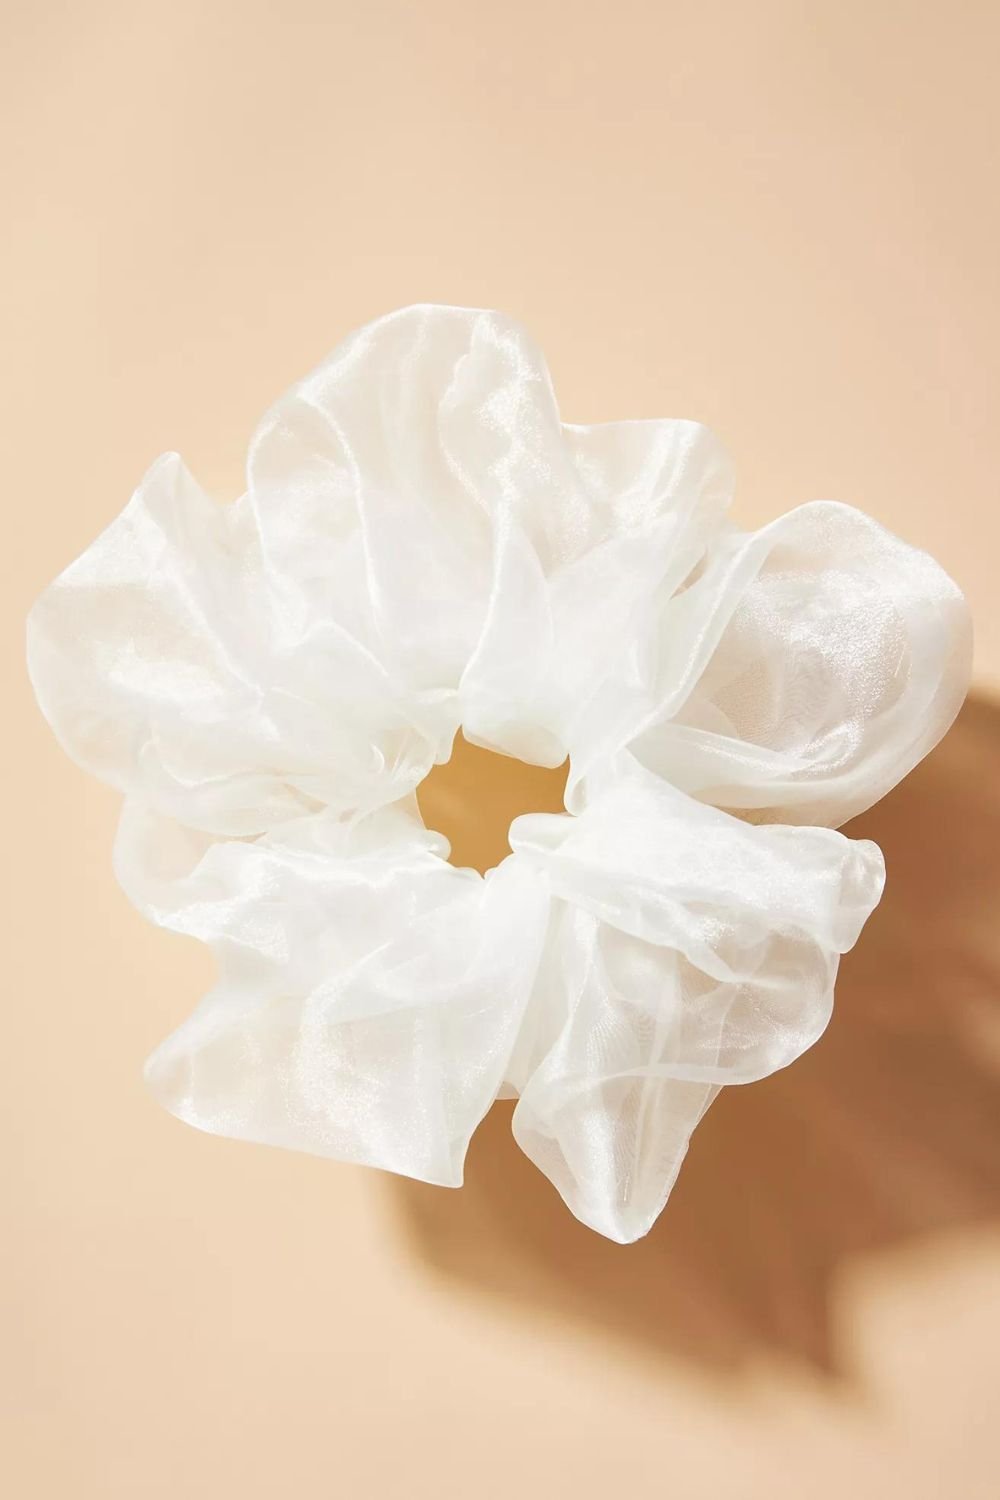 Room Shop | Giant Cloud Scrunchie | Hair Accessories - Women's Hair Accessories - Blooming Daily